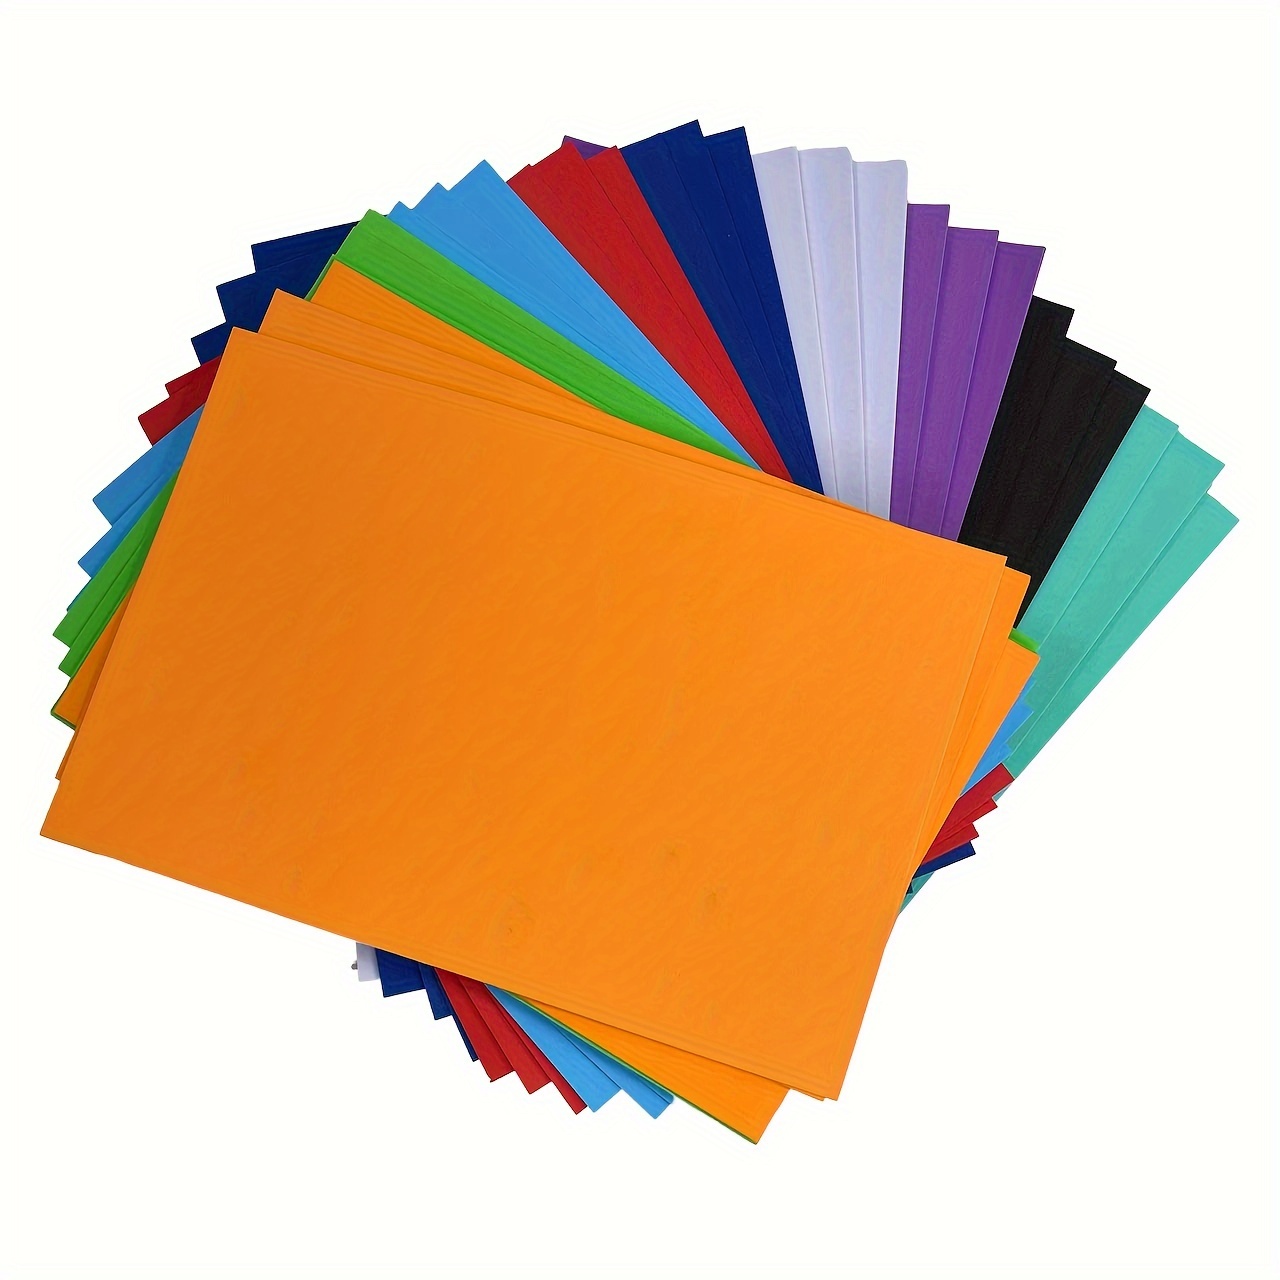 40pcs Felt Fabric Sheets For Crafts, Sewing, Party Decorations, 6x6  (15x15cm, 40 Rainbow Colors)